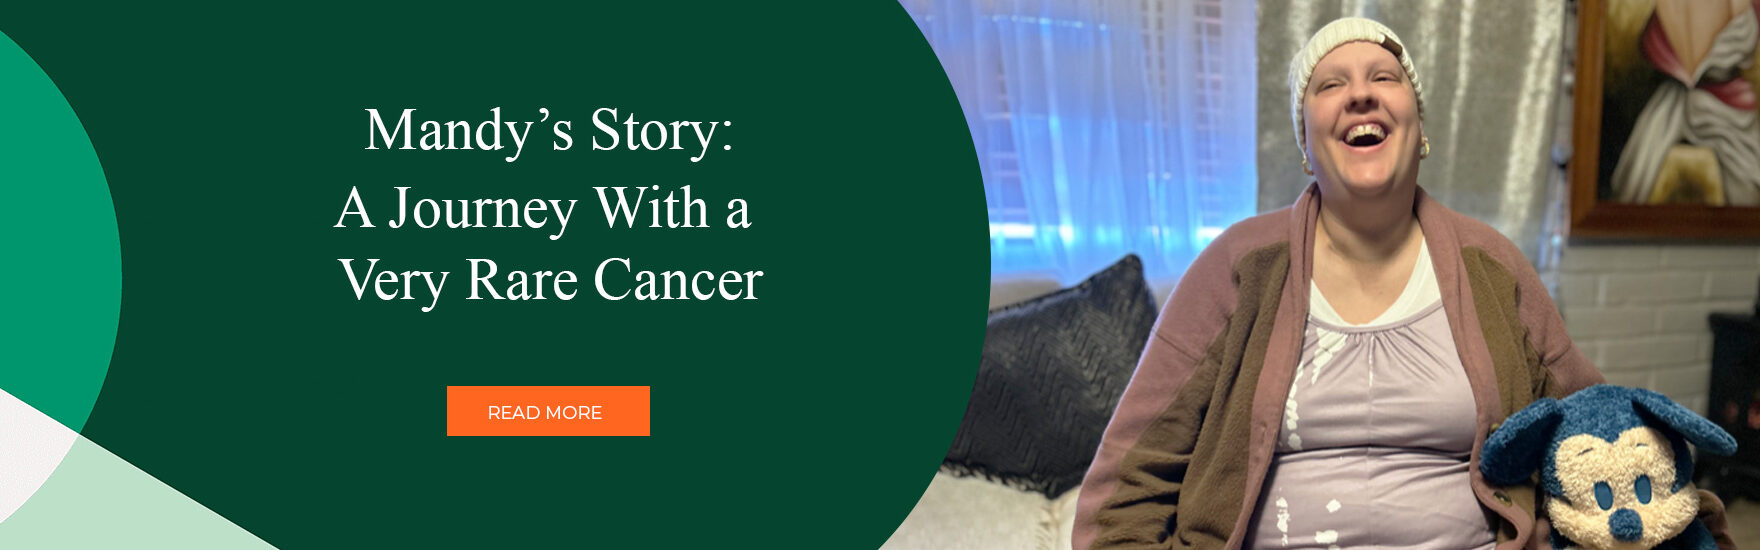 Mandy’s Story: A Journey With a Very Rare Cancer